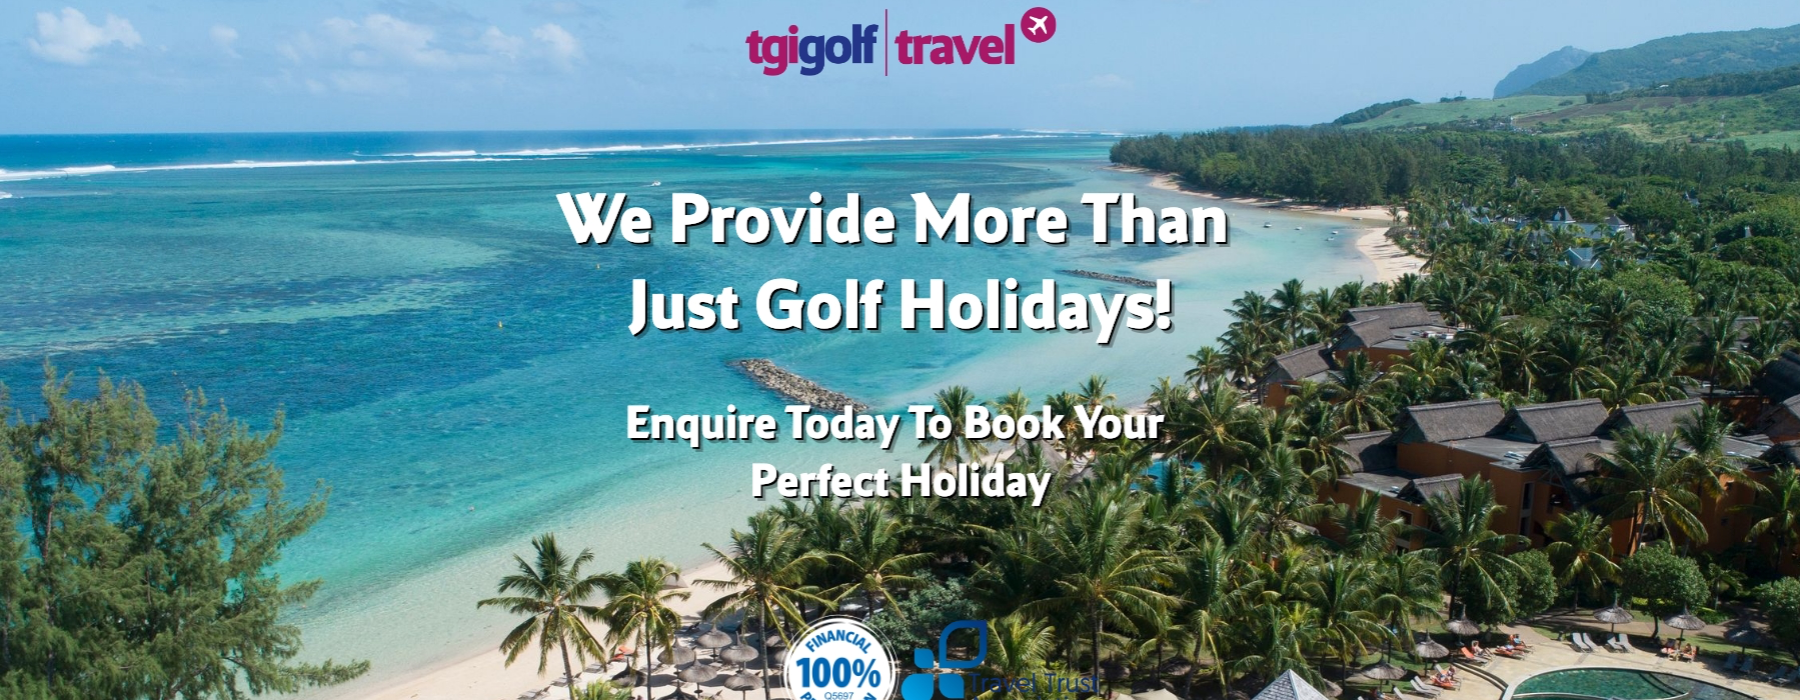 More than just golf holidays